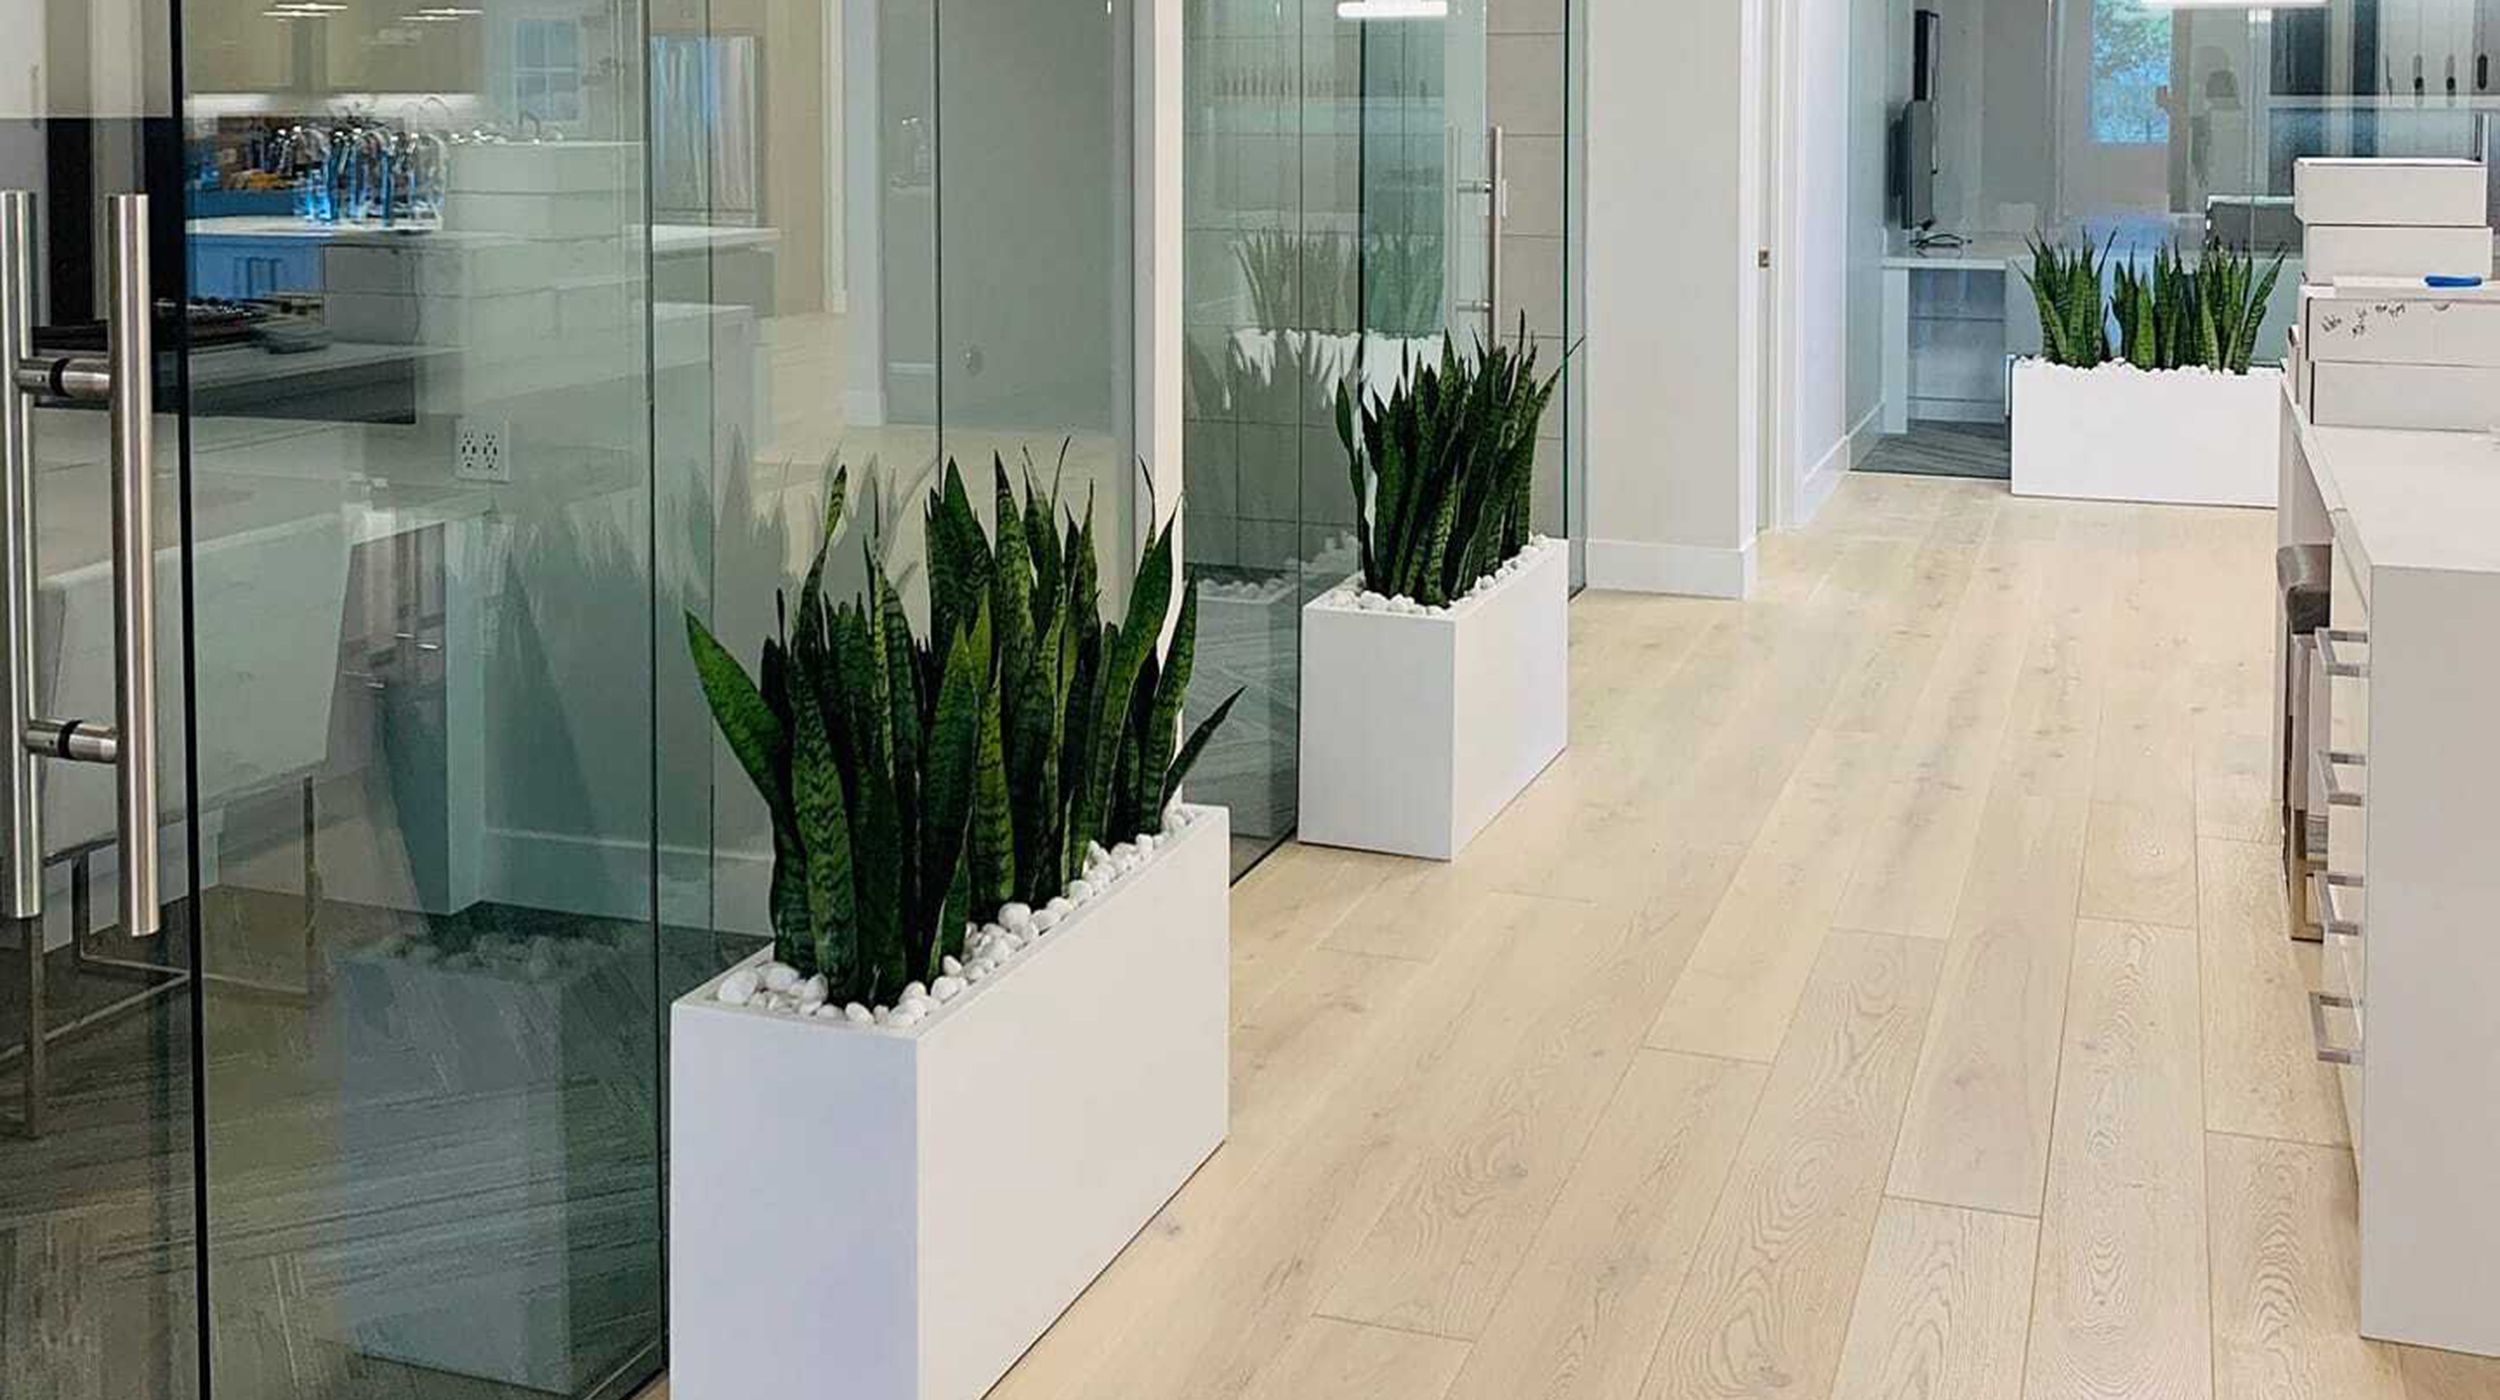 Potted plants line an office hallway